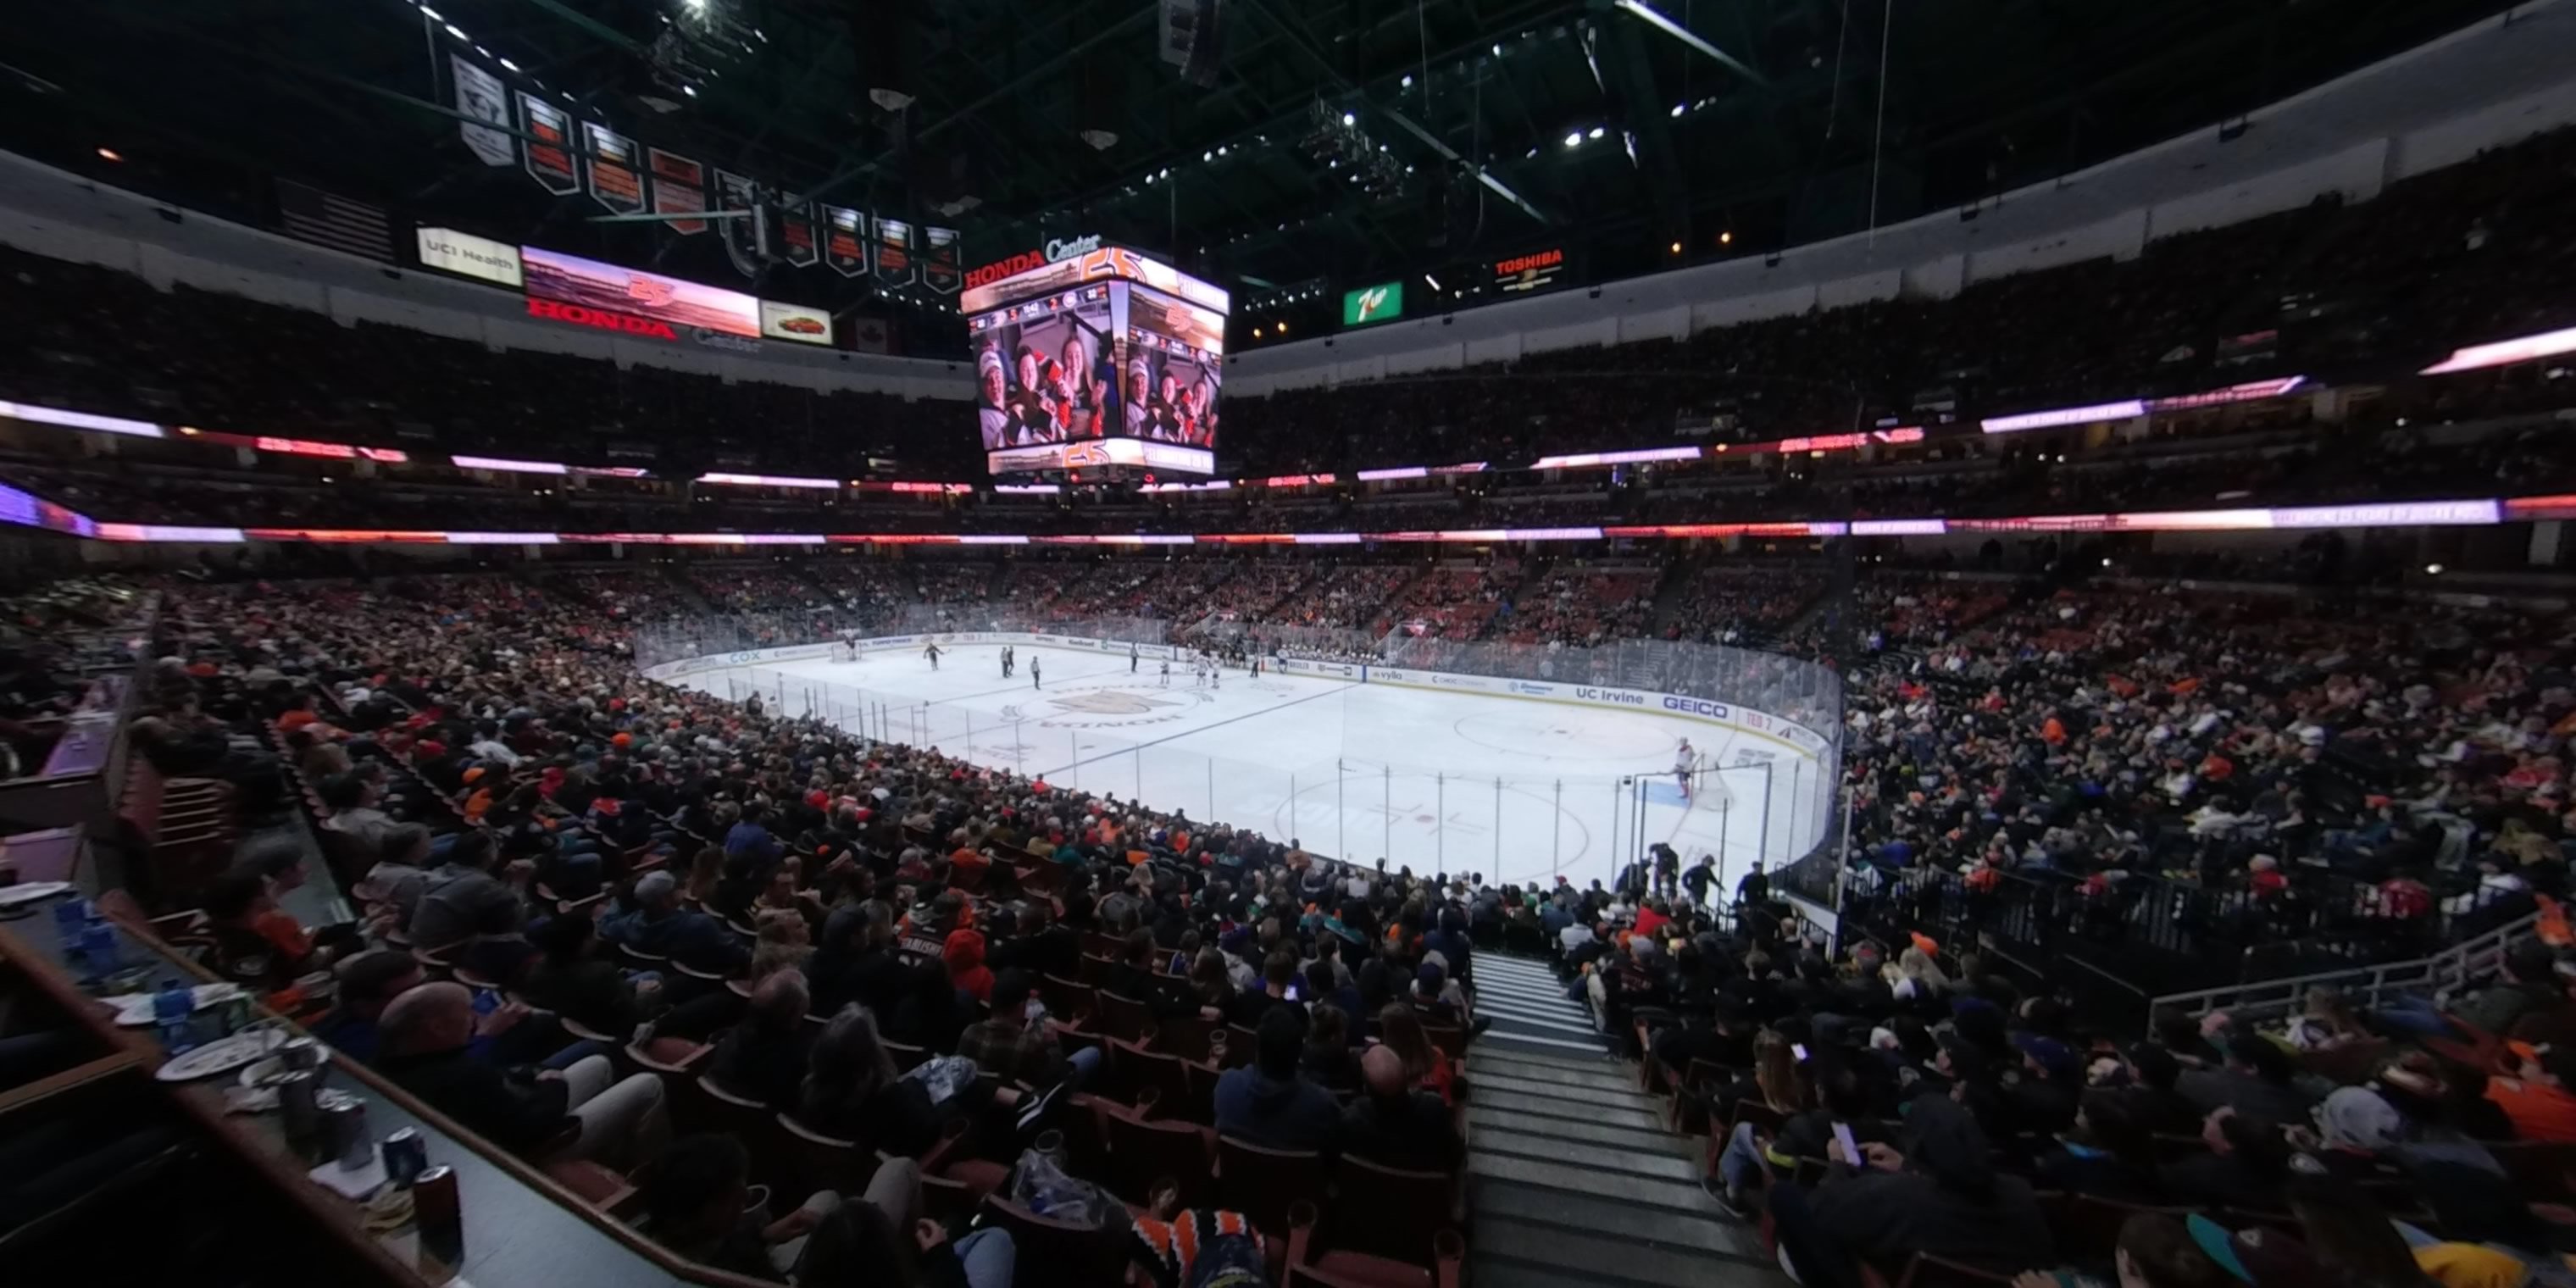 section 218 panoramic seat view  for hockey - honda center